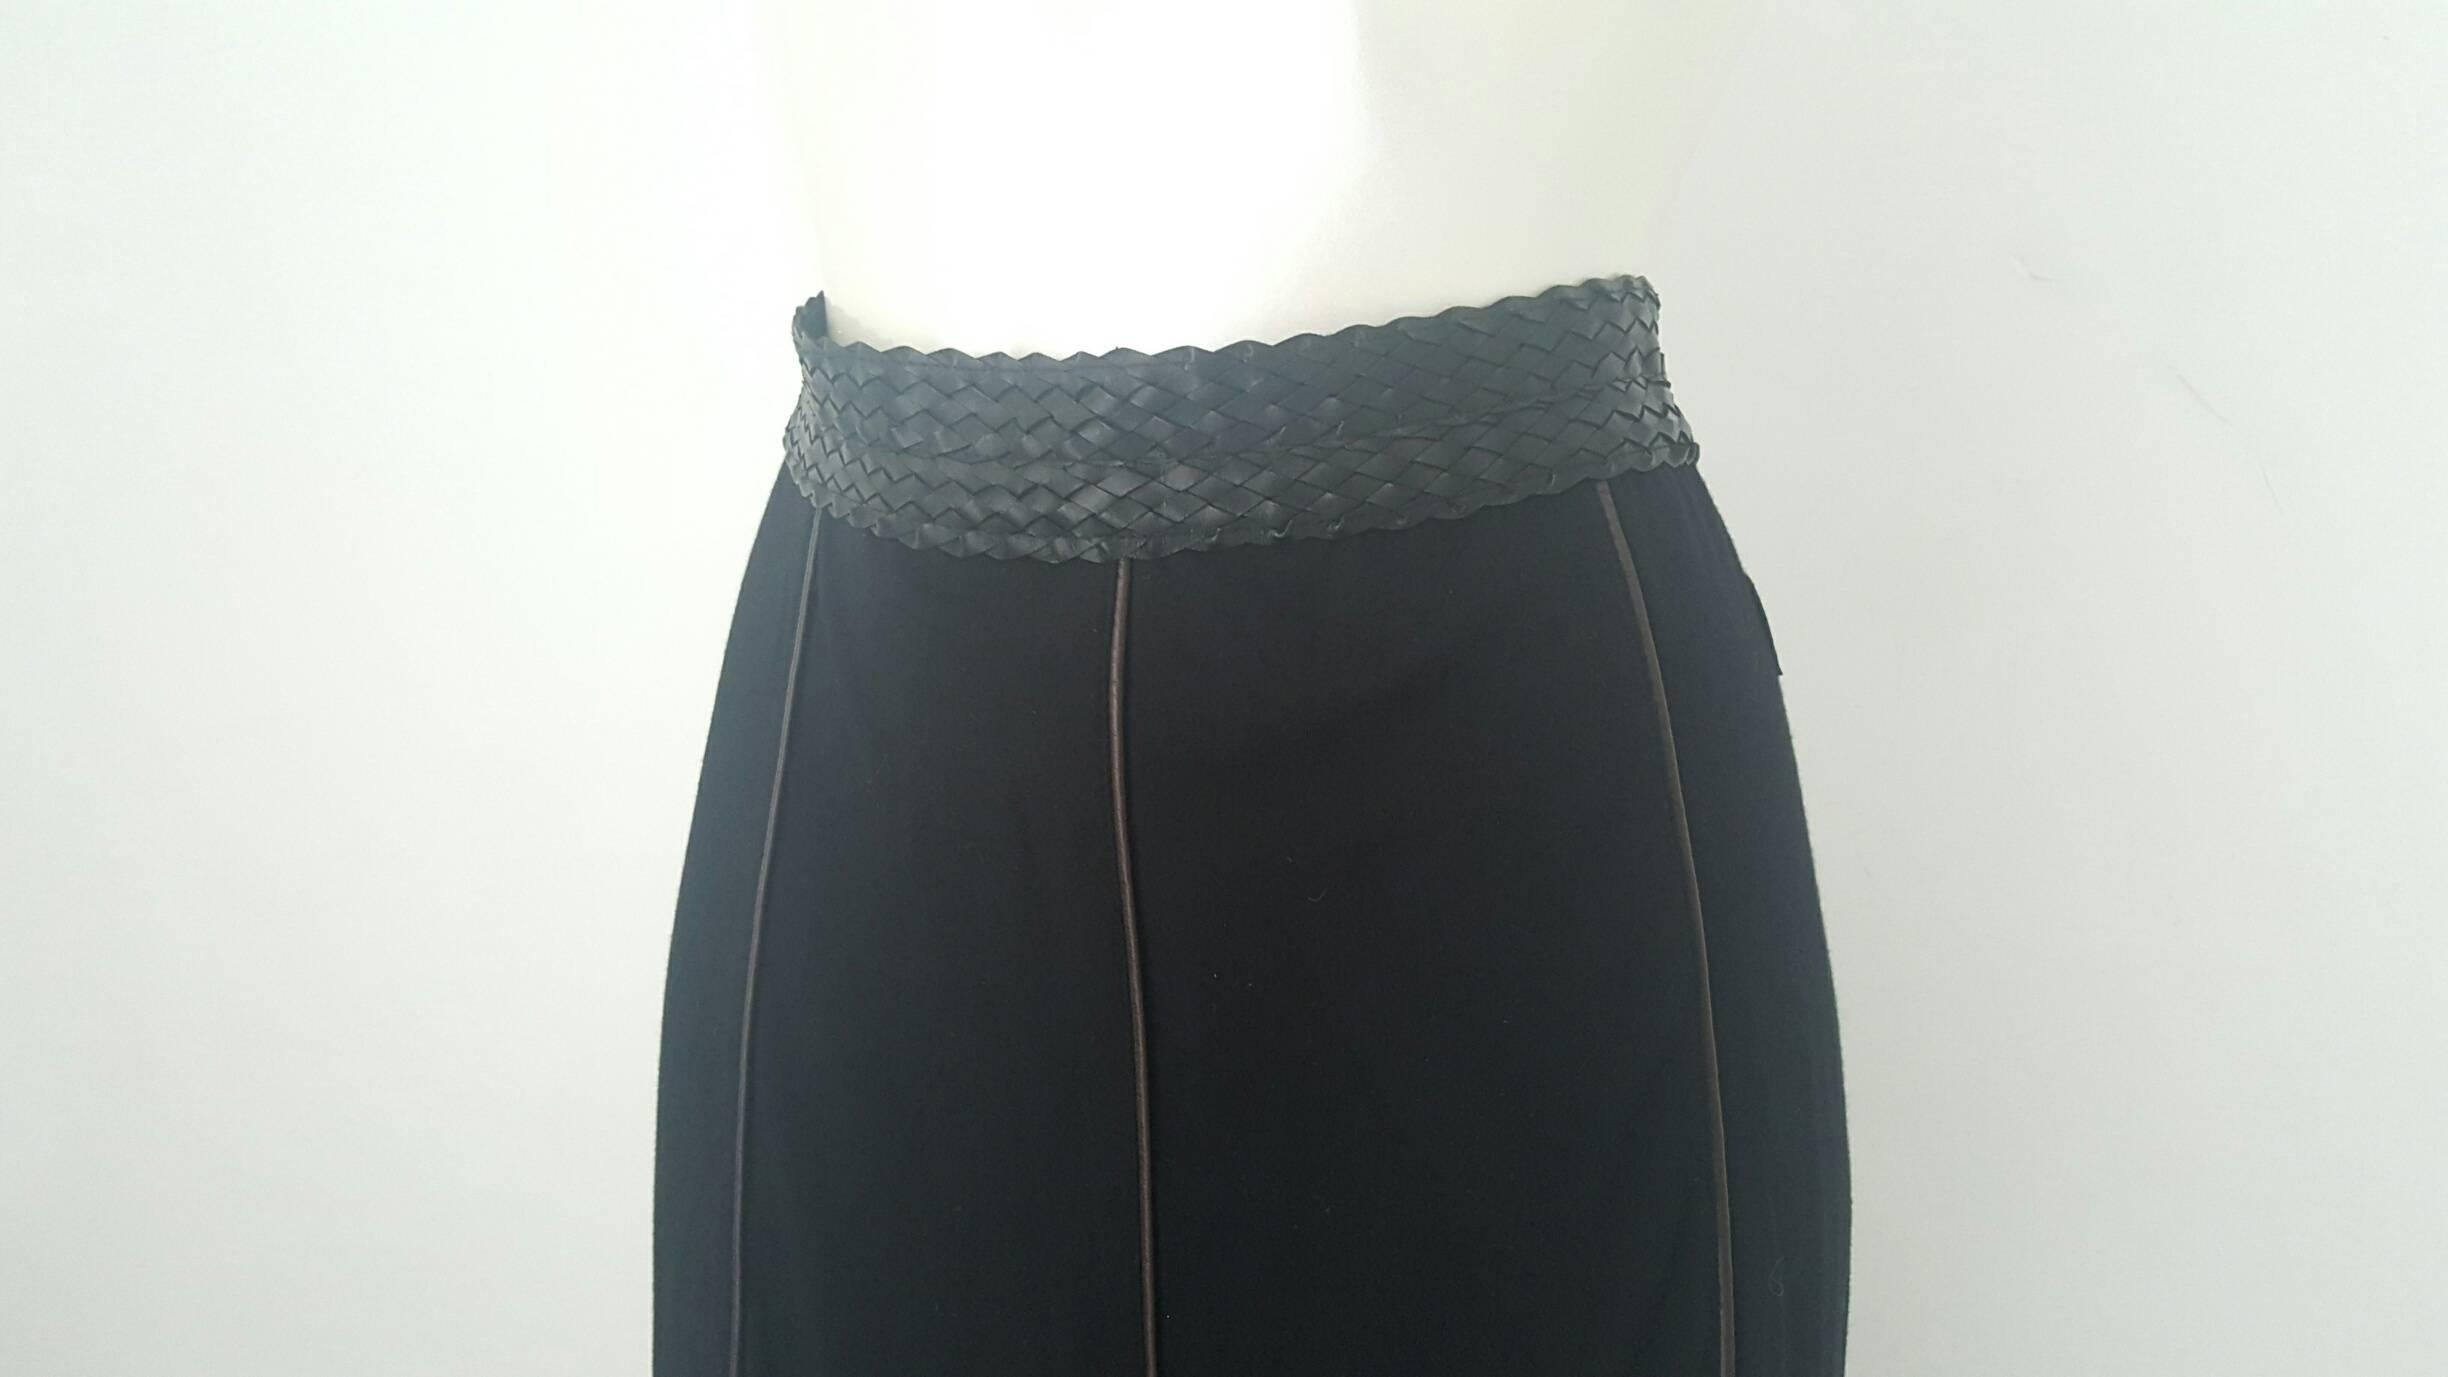 1990s Moschino jeans black skirt with leather belt and details in italian size range 46
composition: 96% viscose 4% elastane